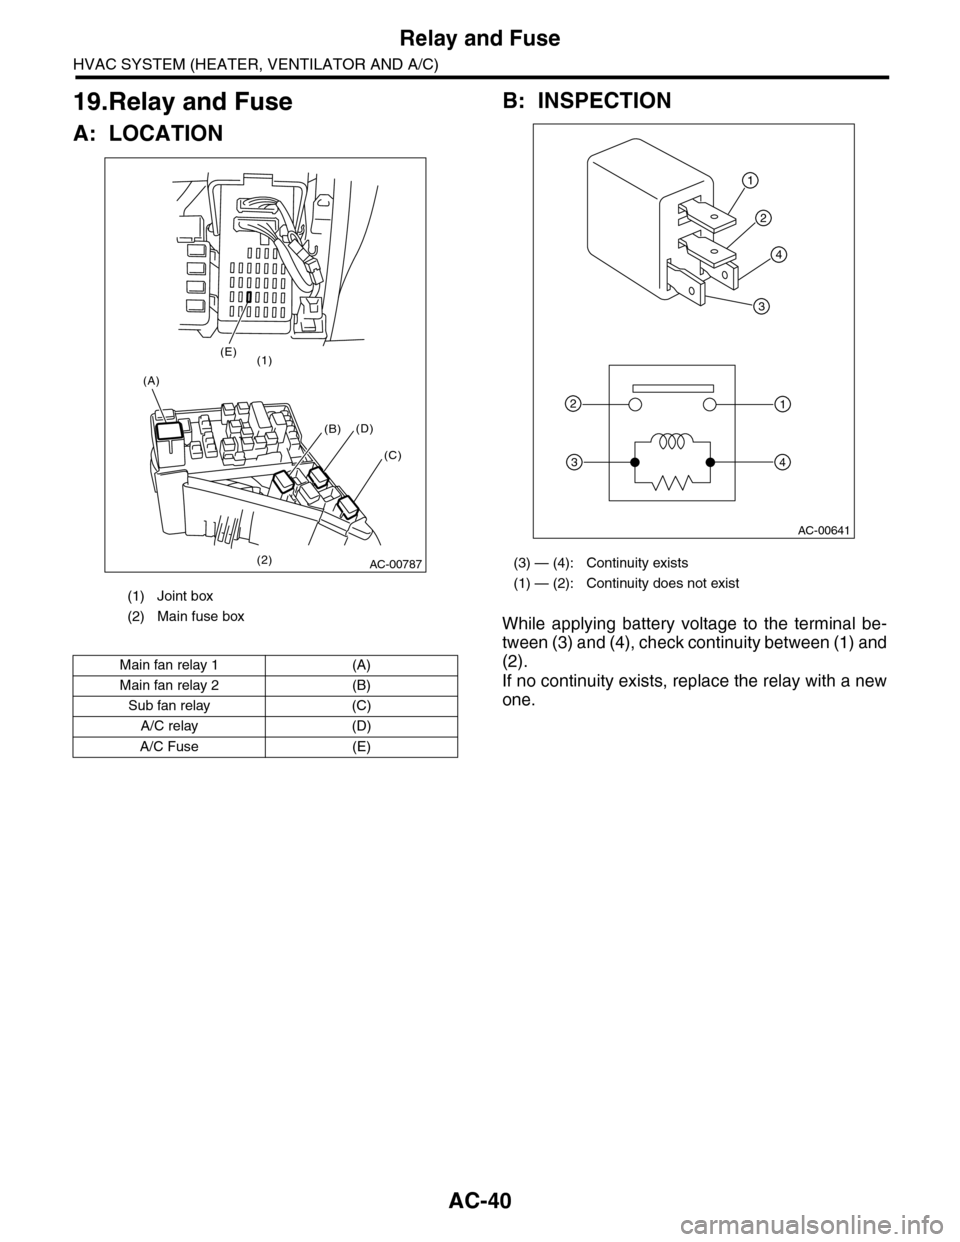 SUBARU TRIBECA 2009 1.G Service Workshop Manual AC-40
Relay and Fuse
HVAC SYSTEM (HEATER, VENTILATOR AND A/C)
19.Relay and Fuse
A: LOCATION
B: INSPECTION
While  applying  battery  voltage  to  the  terminal  be-
tween (3) and (4), check continuity 